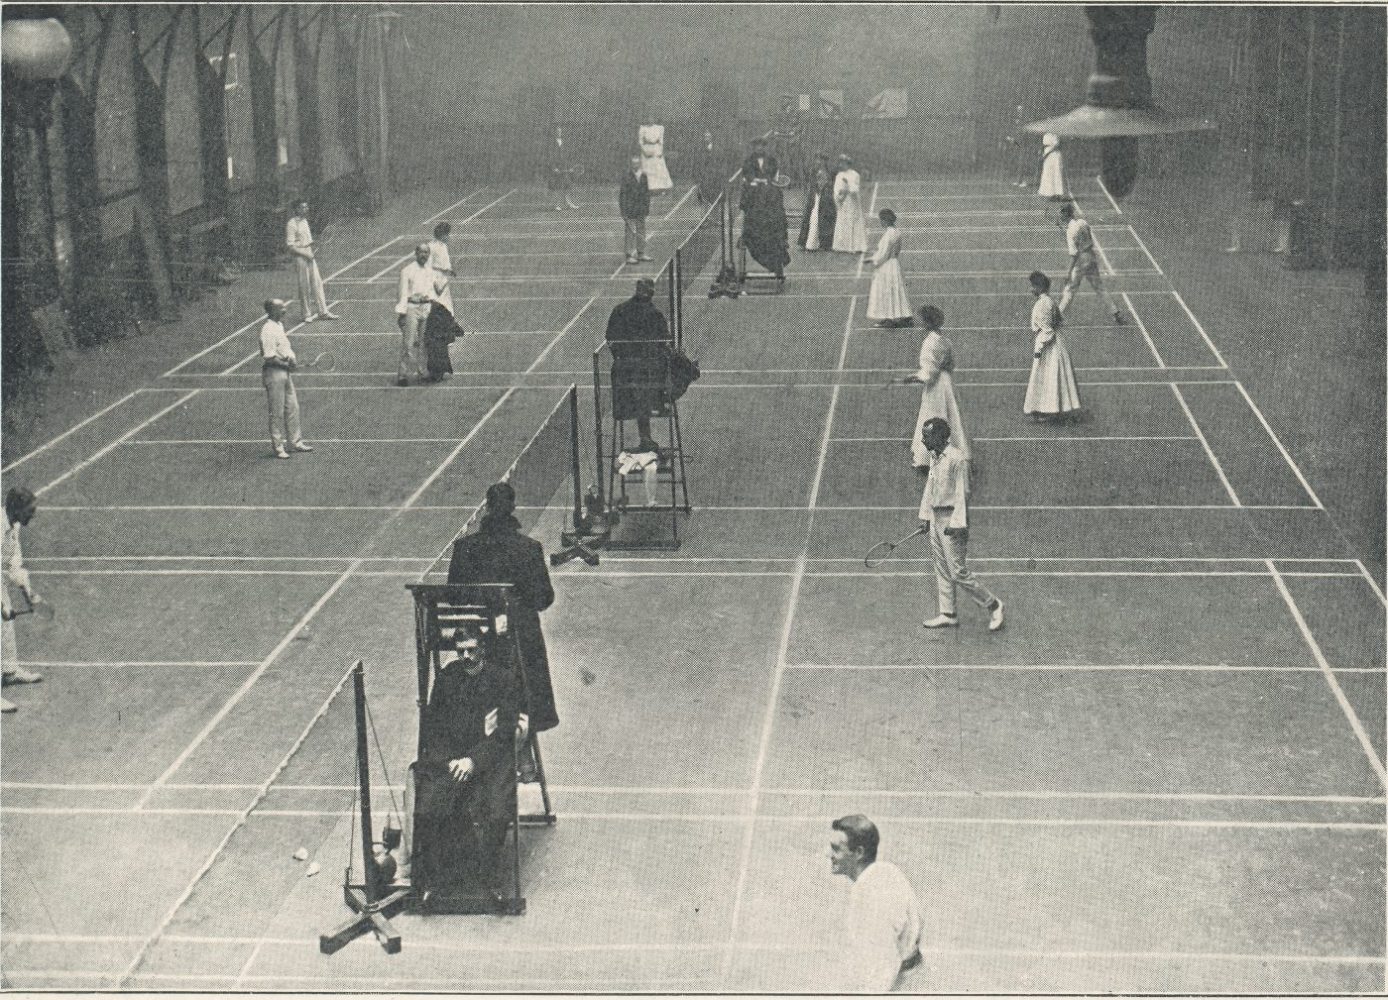 The History of the All-England Badminton Championships National Badminton Museum